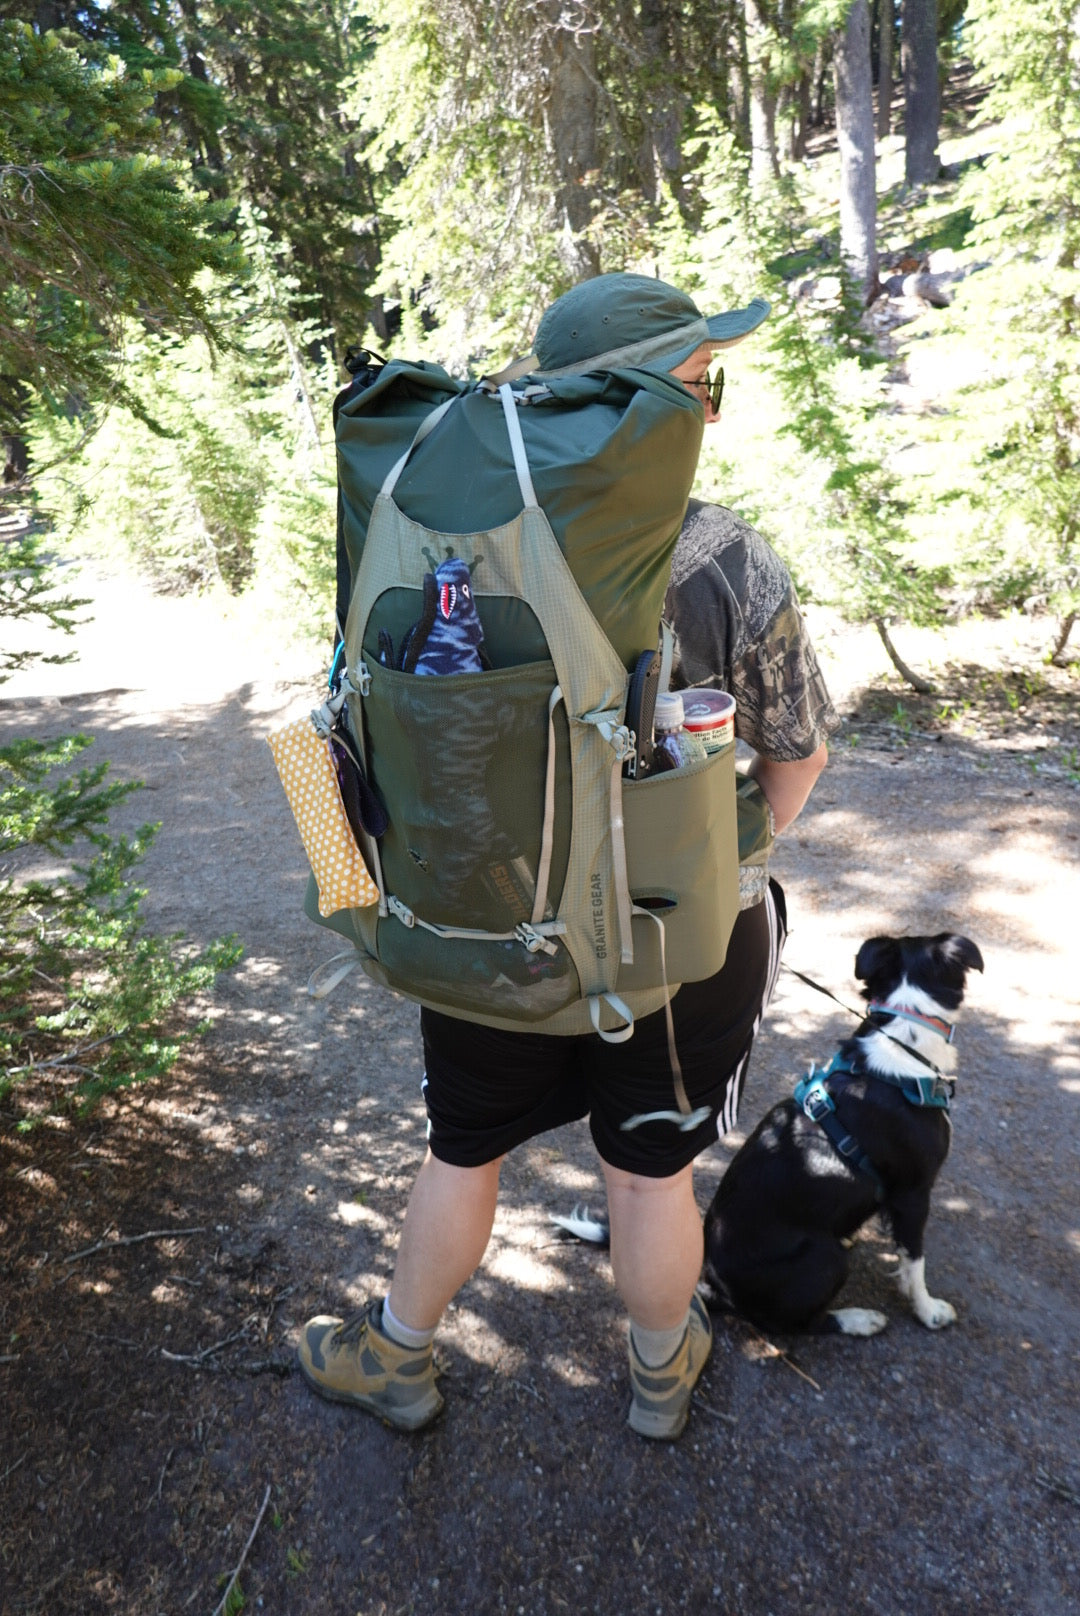 Woman with large backpacking pack stuffed full, with dog in front range harness at her side.